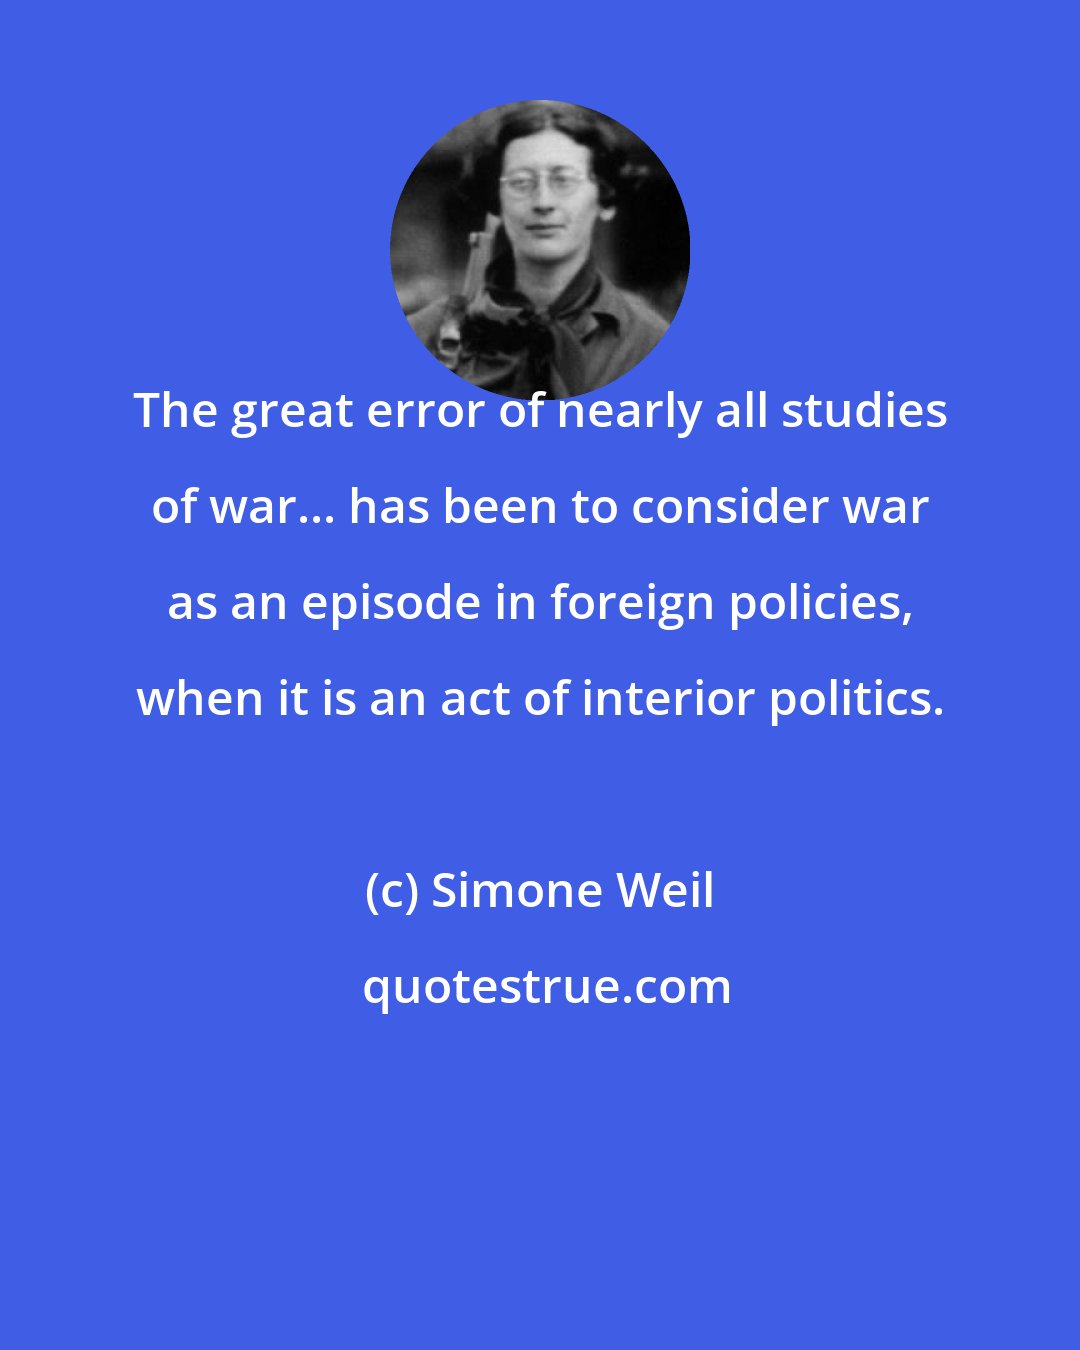 Simone Weil: The great error of nearly all studies of war... has been to consider war as an episode in foreign policies, when it is an act of interior politics.